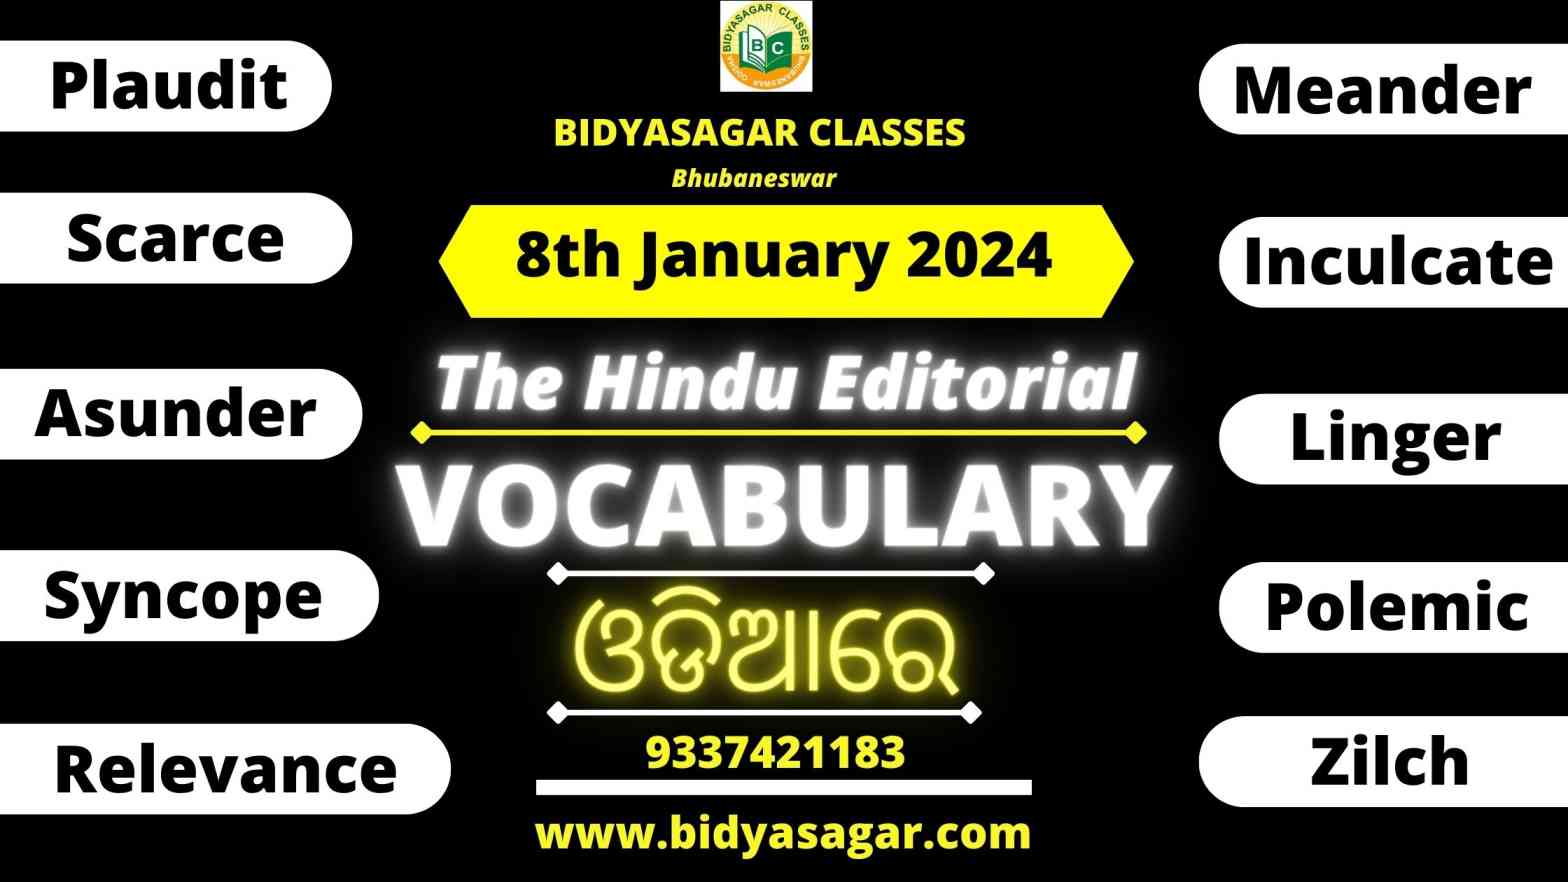 The Hindu Editorial Vocabulary of 8th January 2024